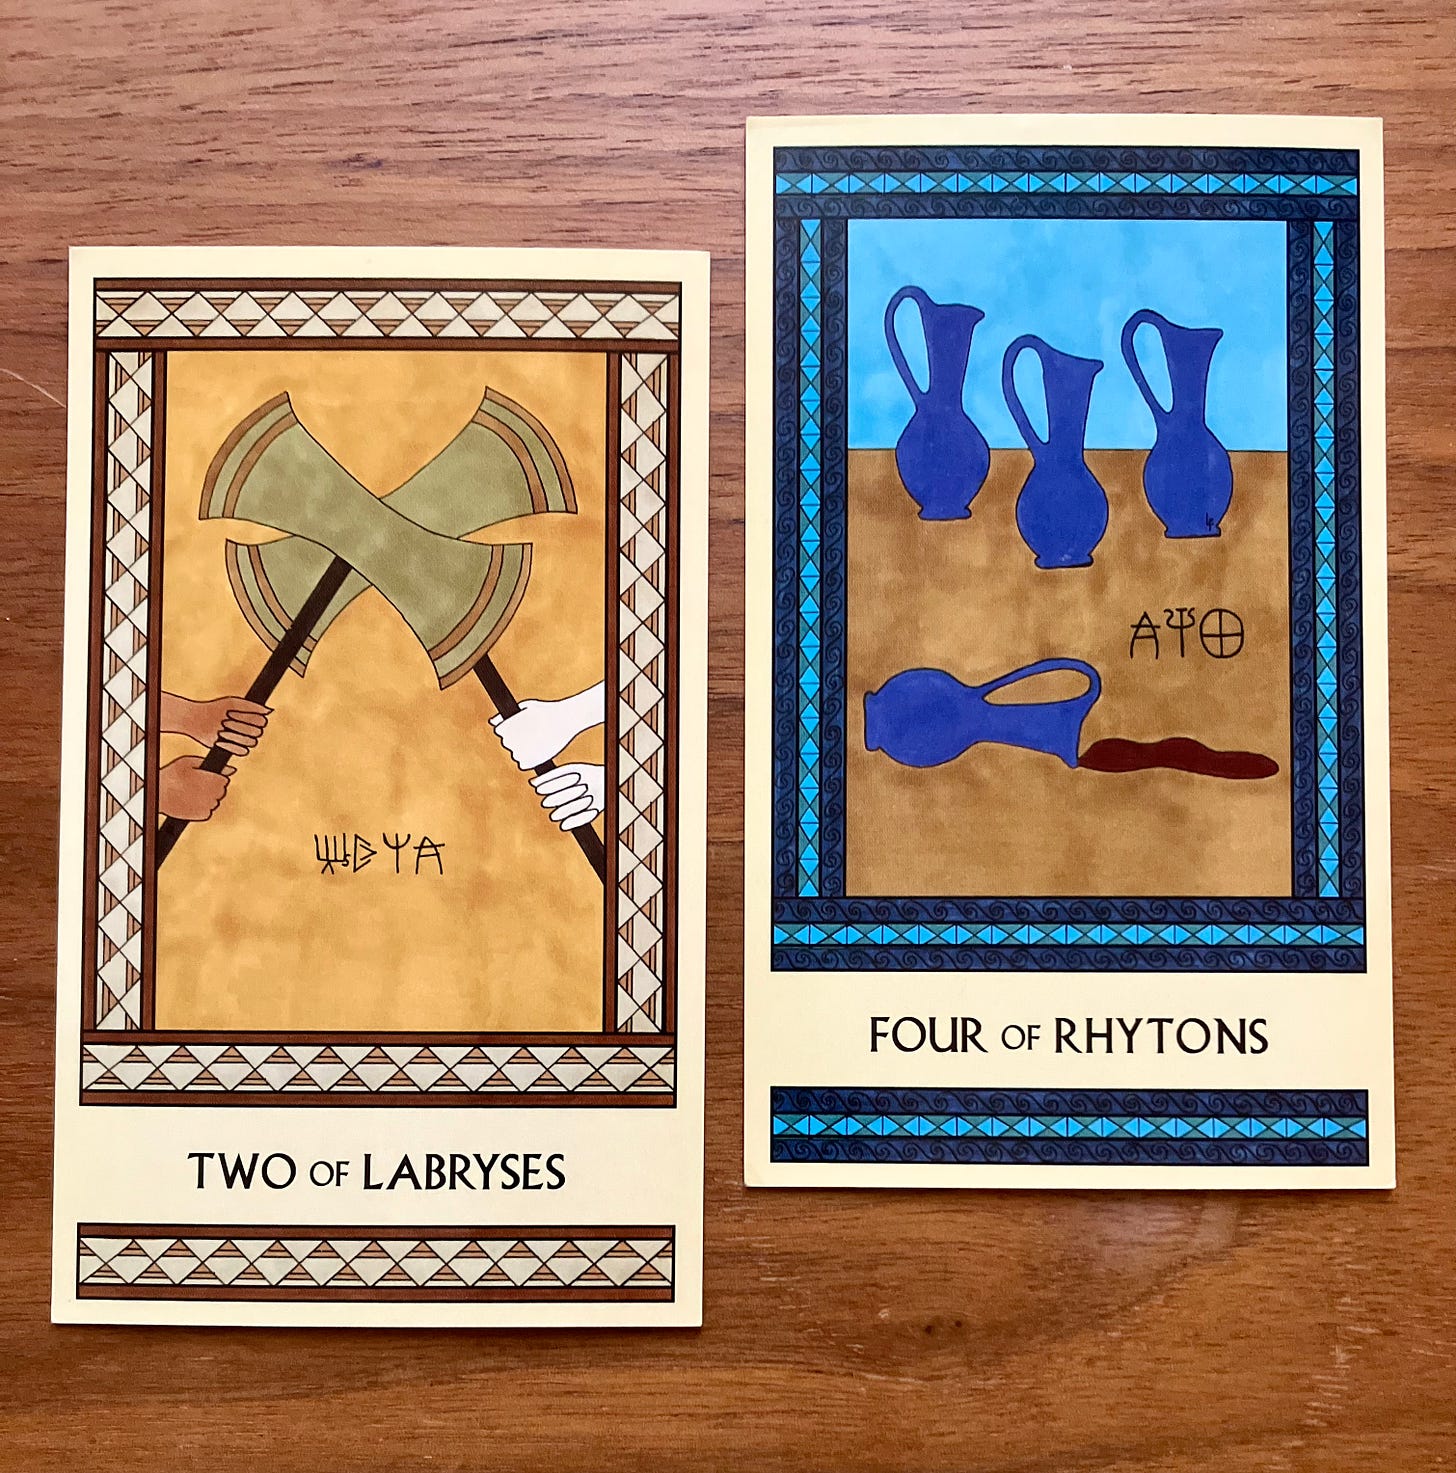 Two Minoan Tarot cards side by side on a wooden table. The Two of Labryses is in shades of gold and cream. It shows two pairs of hands holding large, equally-sized labryses that are clashing. The Four of Rhytons is in shades of blue and tan. It shows three pitchers sitting on a table with a fourth pitcher tipped over, its contents spilling out.